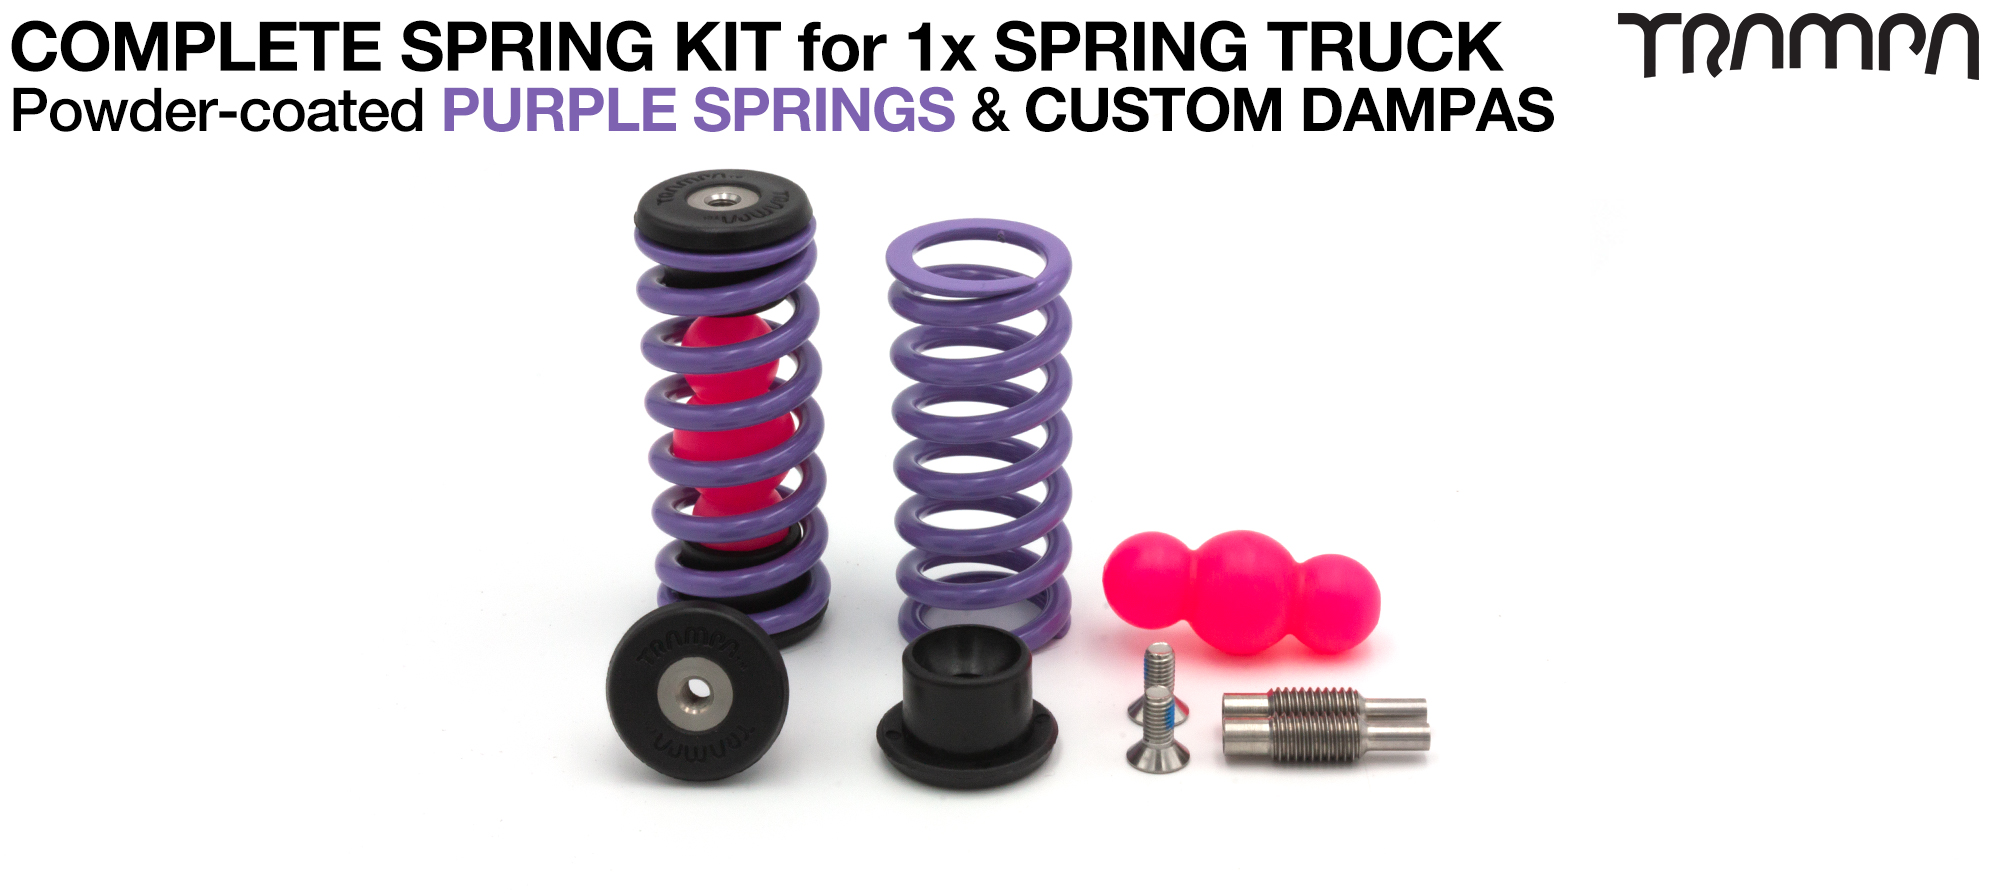 Spring kit Complete for 1x Truck - 2x Spring 2x Dampa 4x Spring Retainers 2x Spring Adjuster & 2 M5x12mm Countersunk Bolt PURPLE Springs 